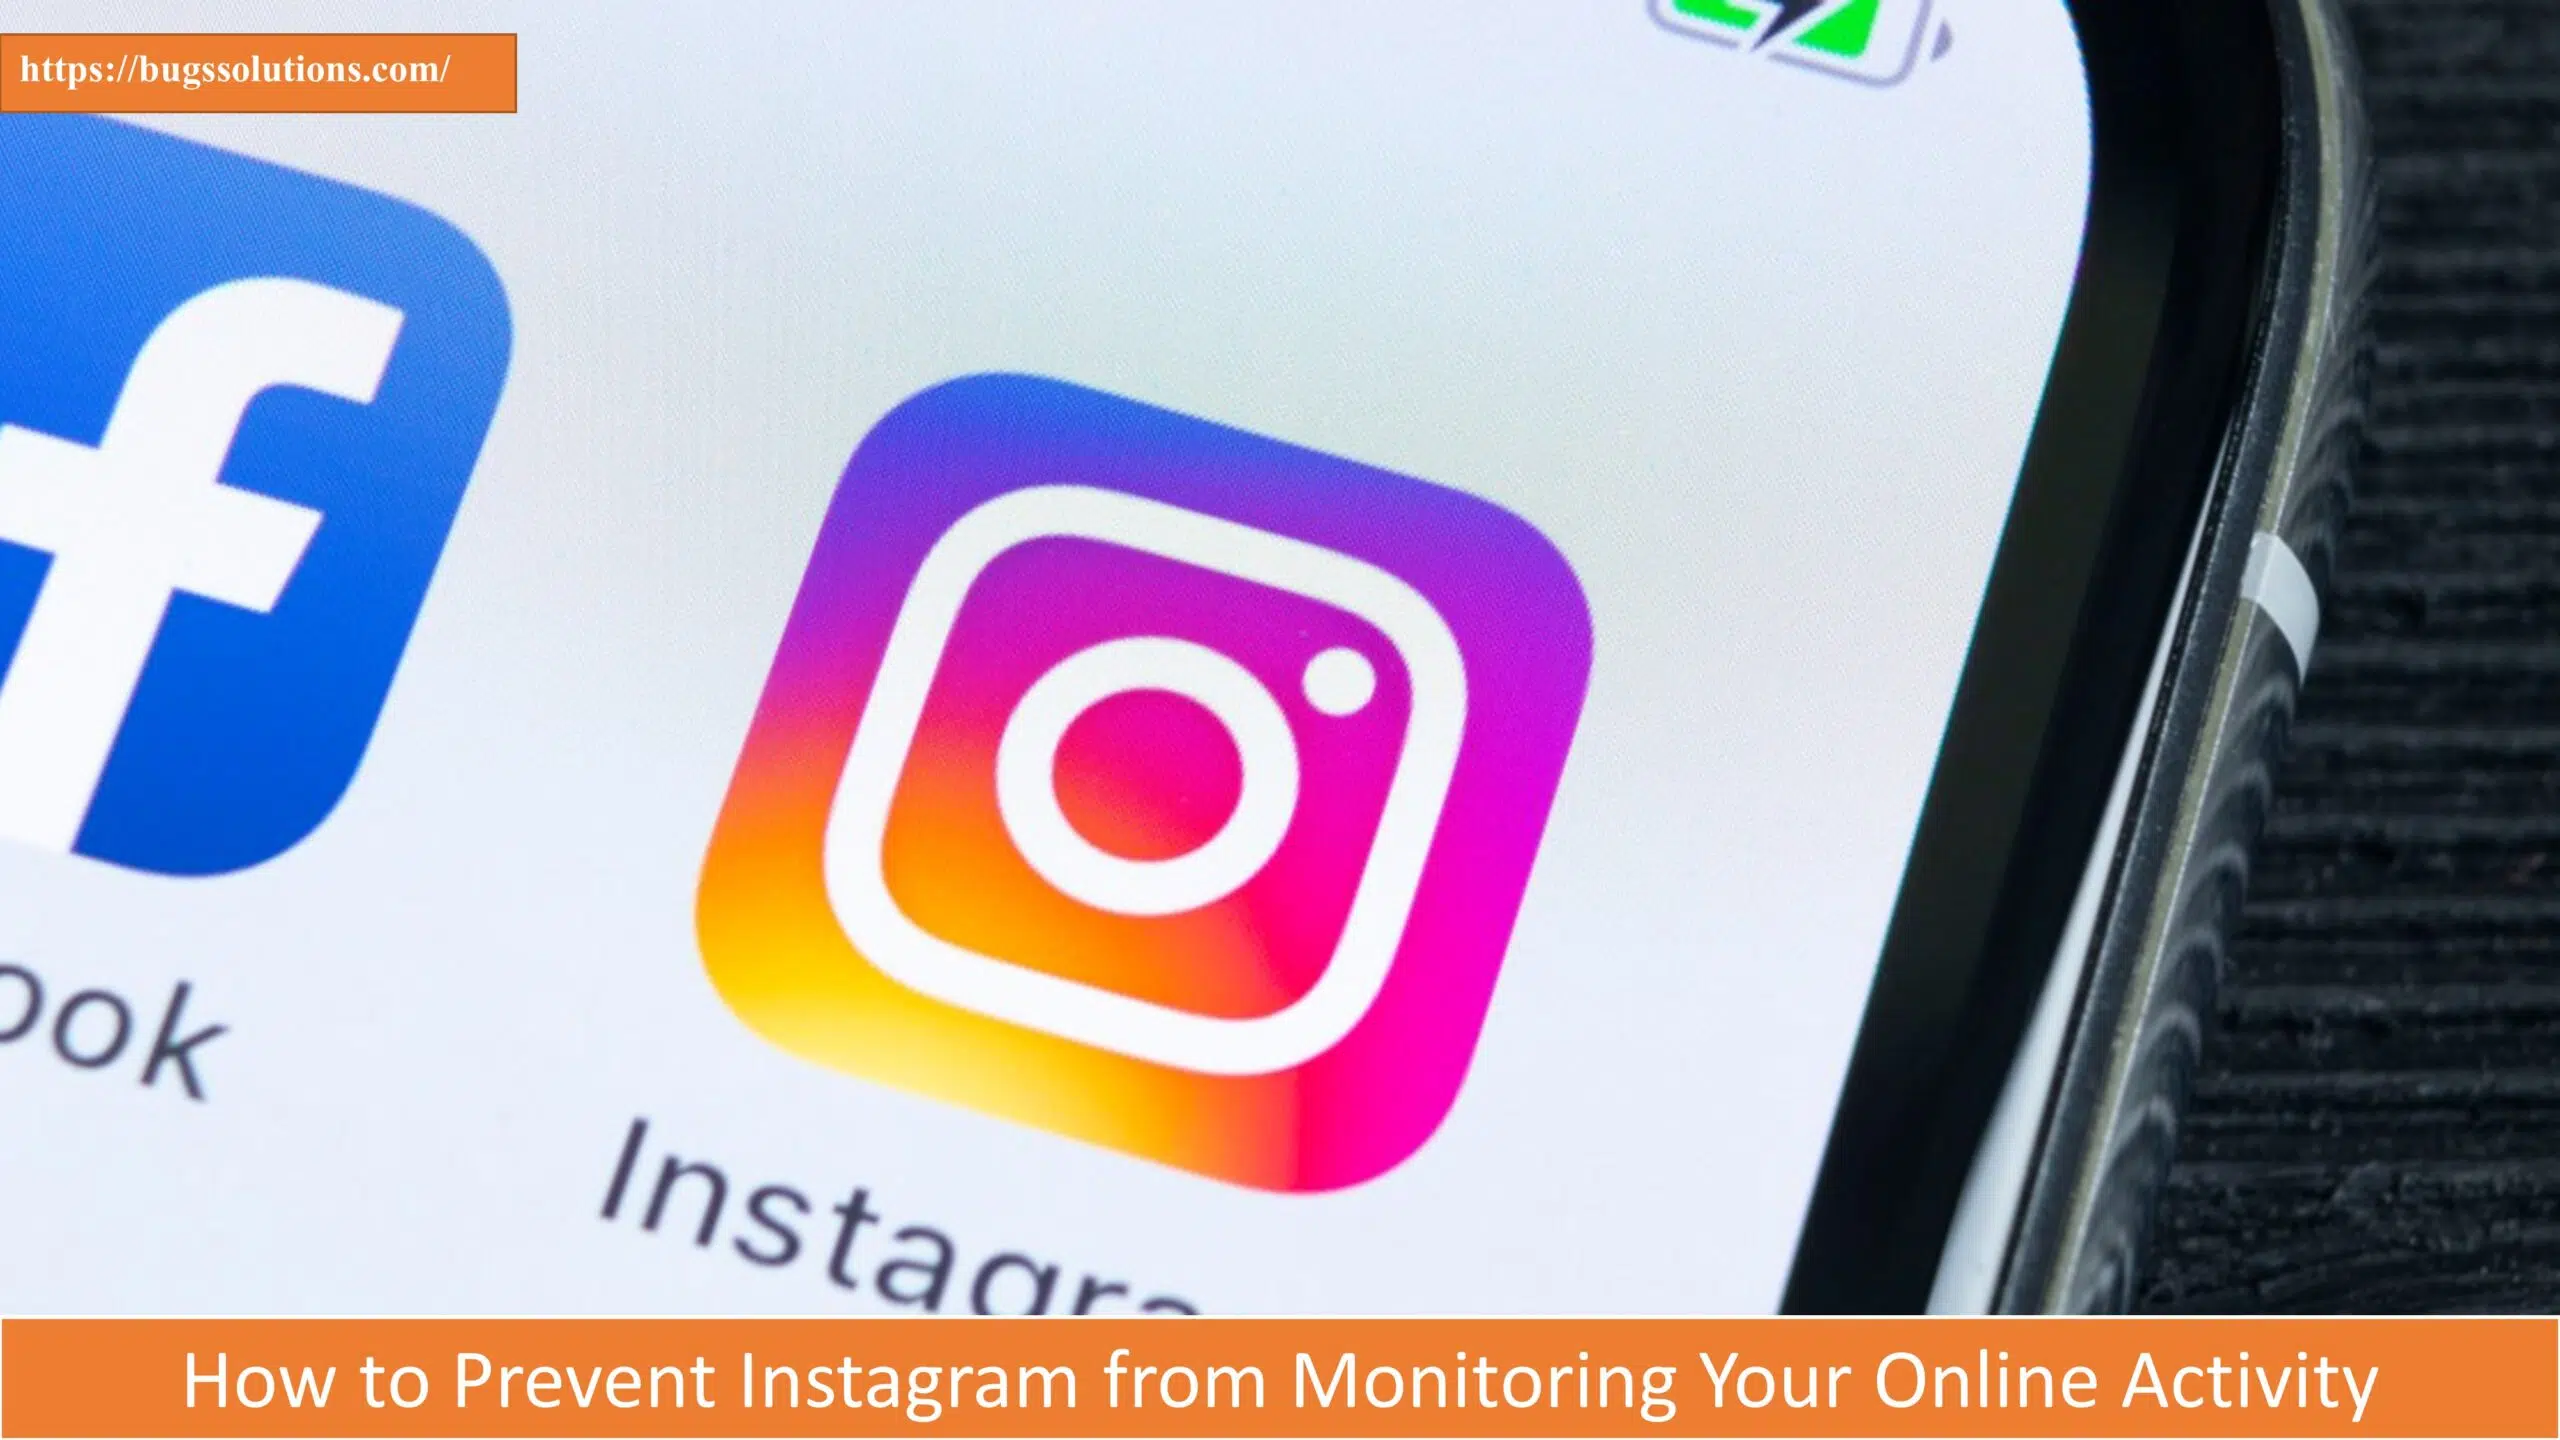 How to Prevent Instagram from Monitoring Your Online Activity - Bugs Solutions